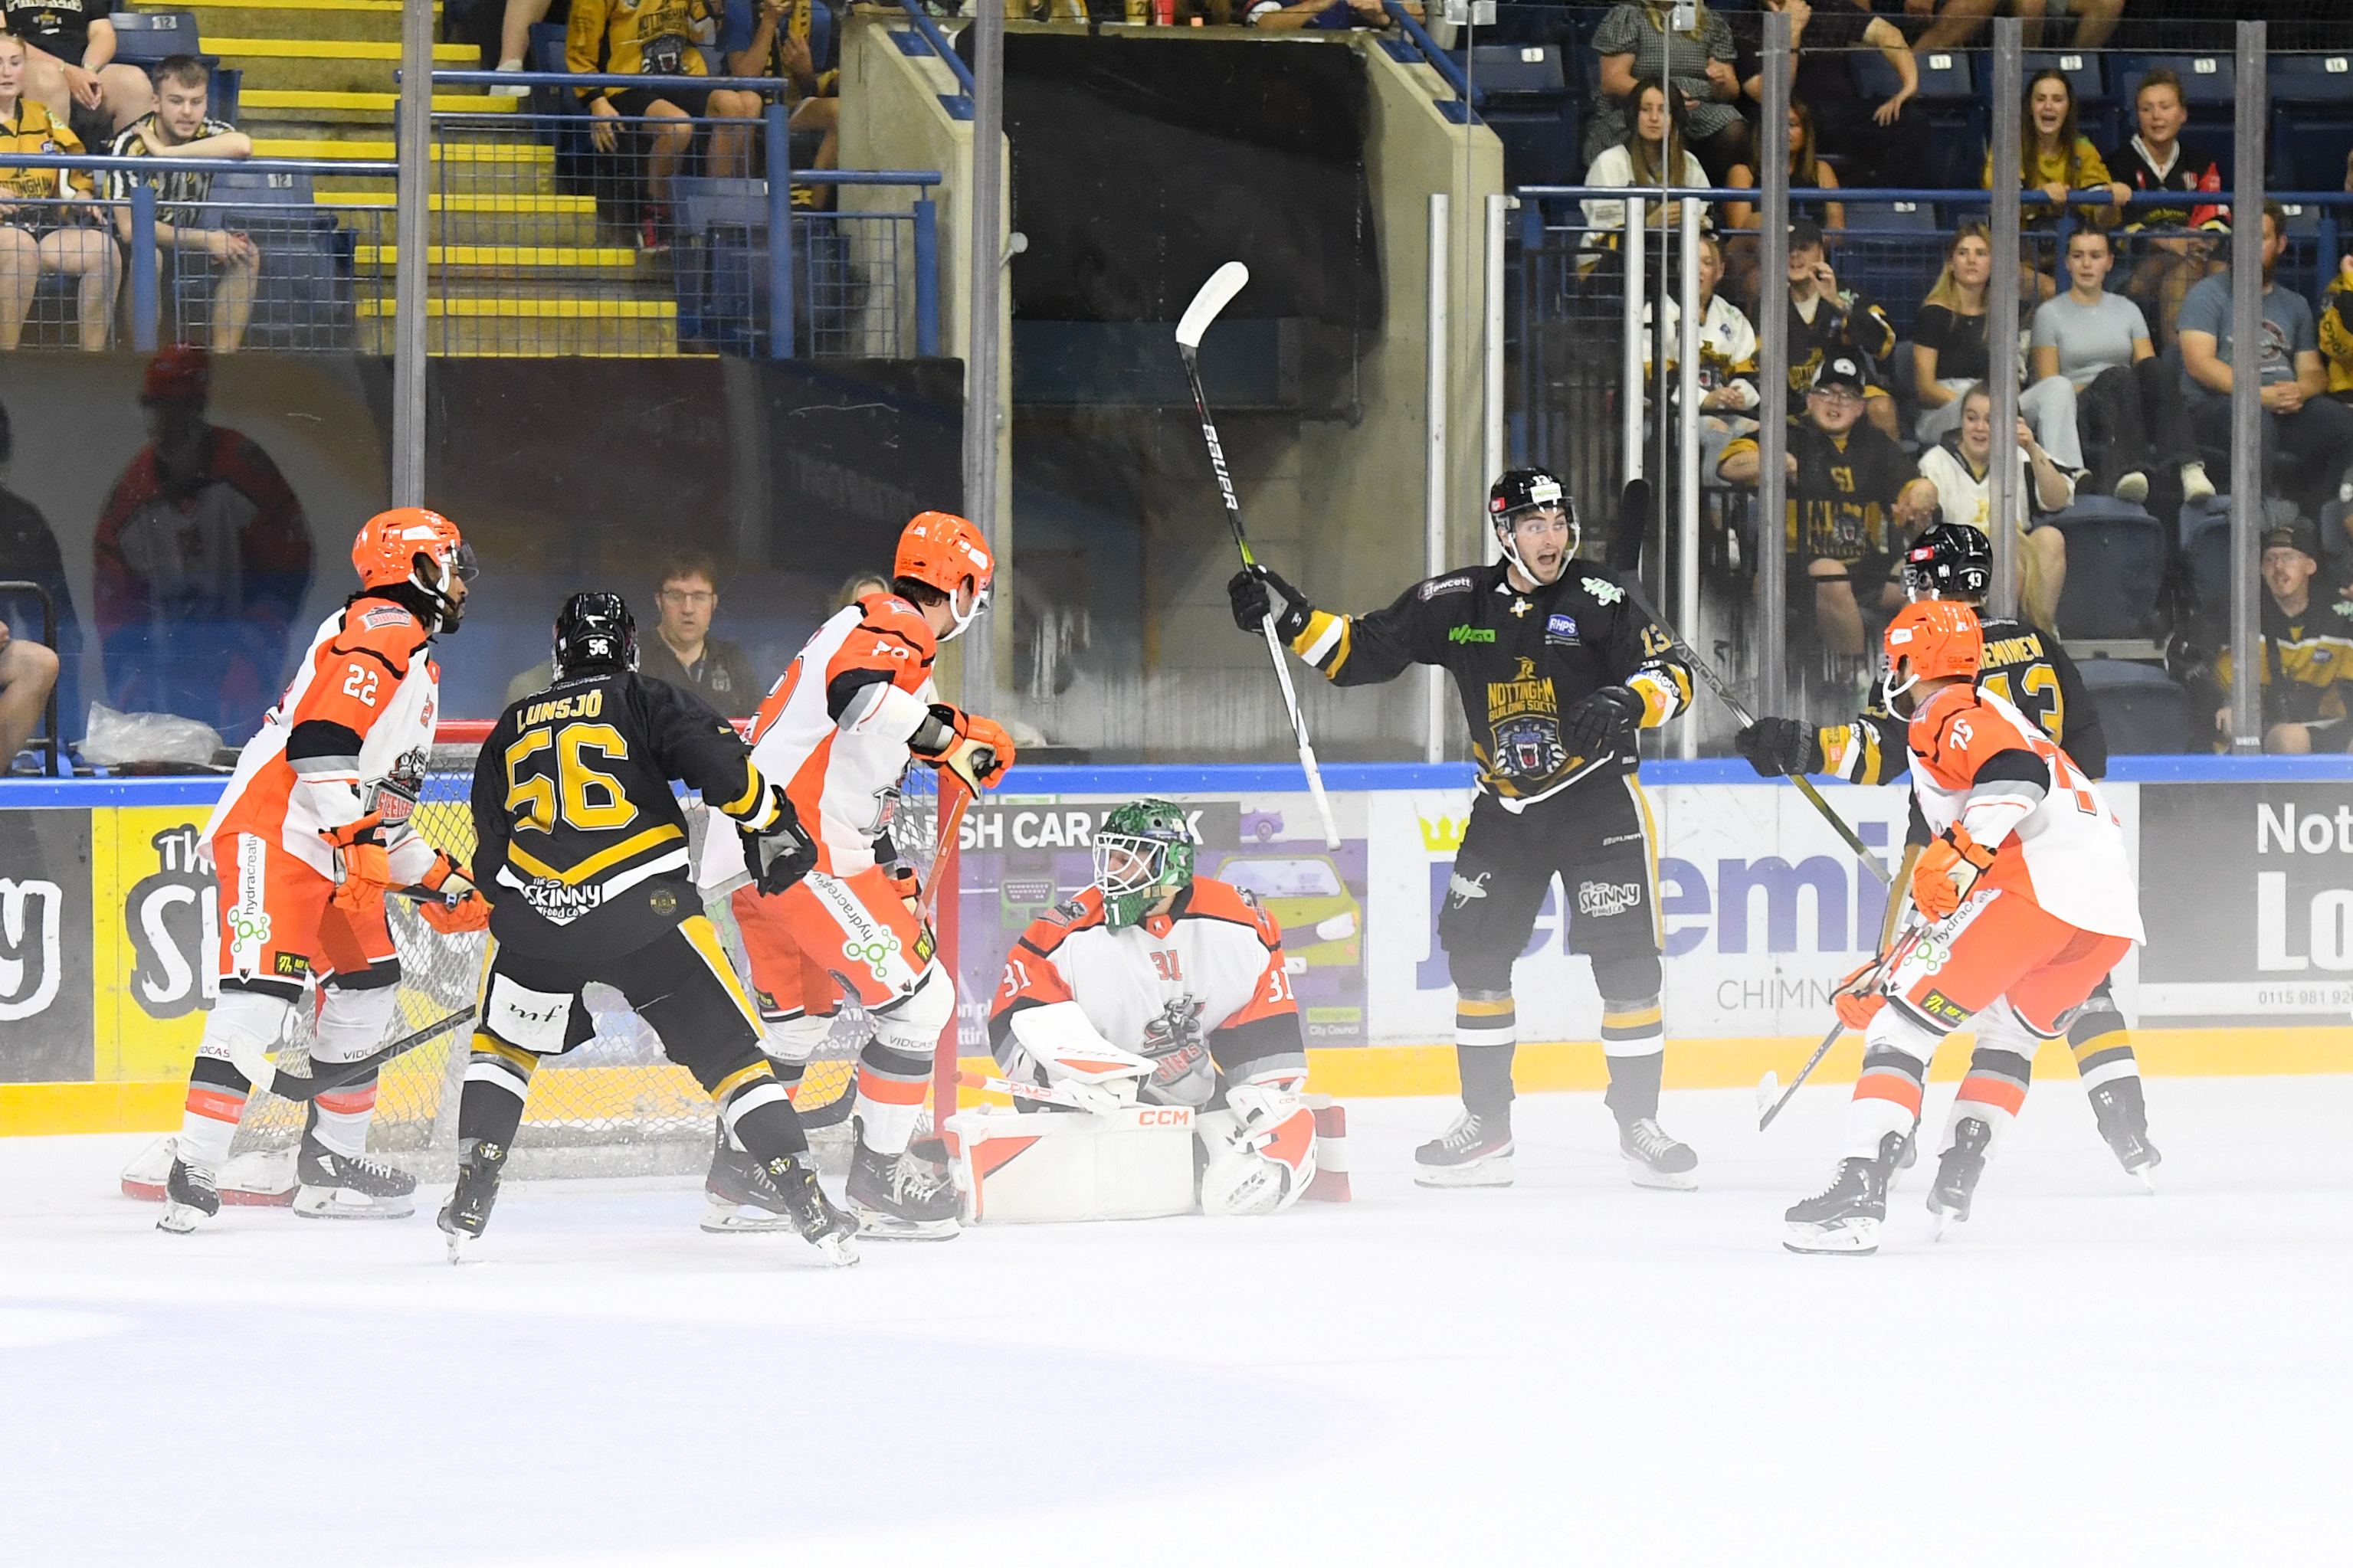 HIGHLIGHTS FROM THRILLING WIN OVER STEELERS Top Image